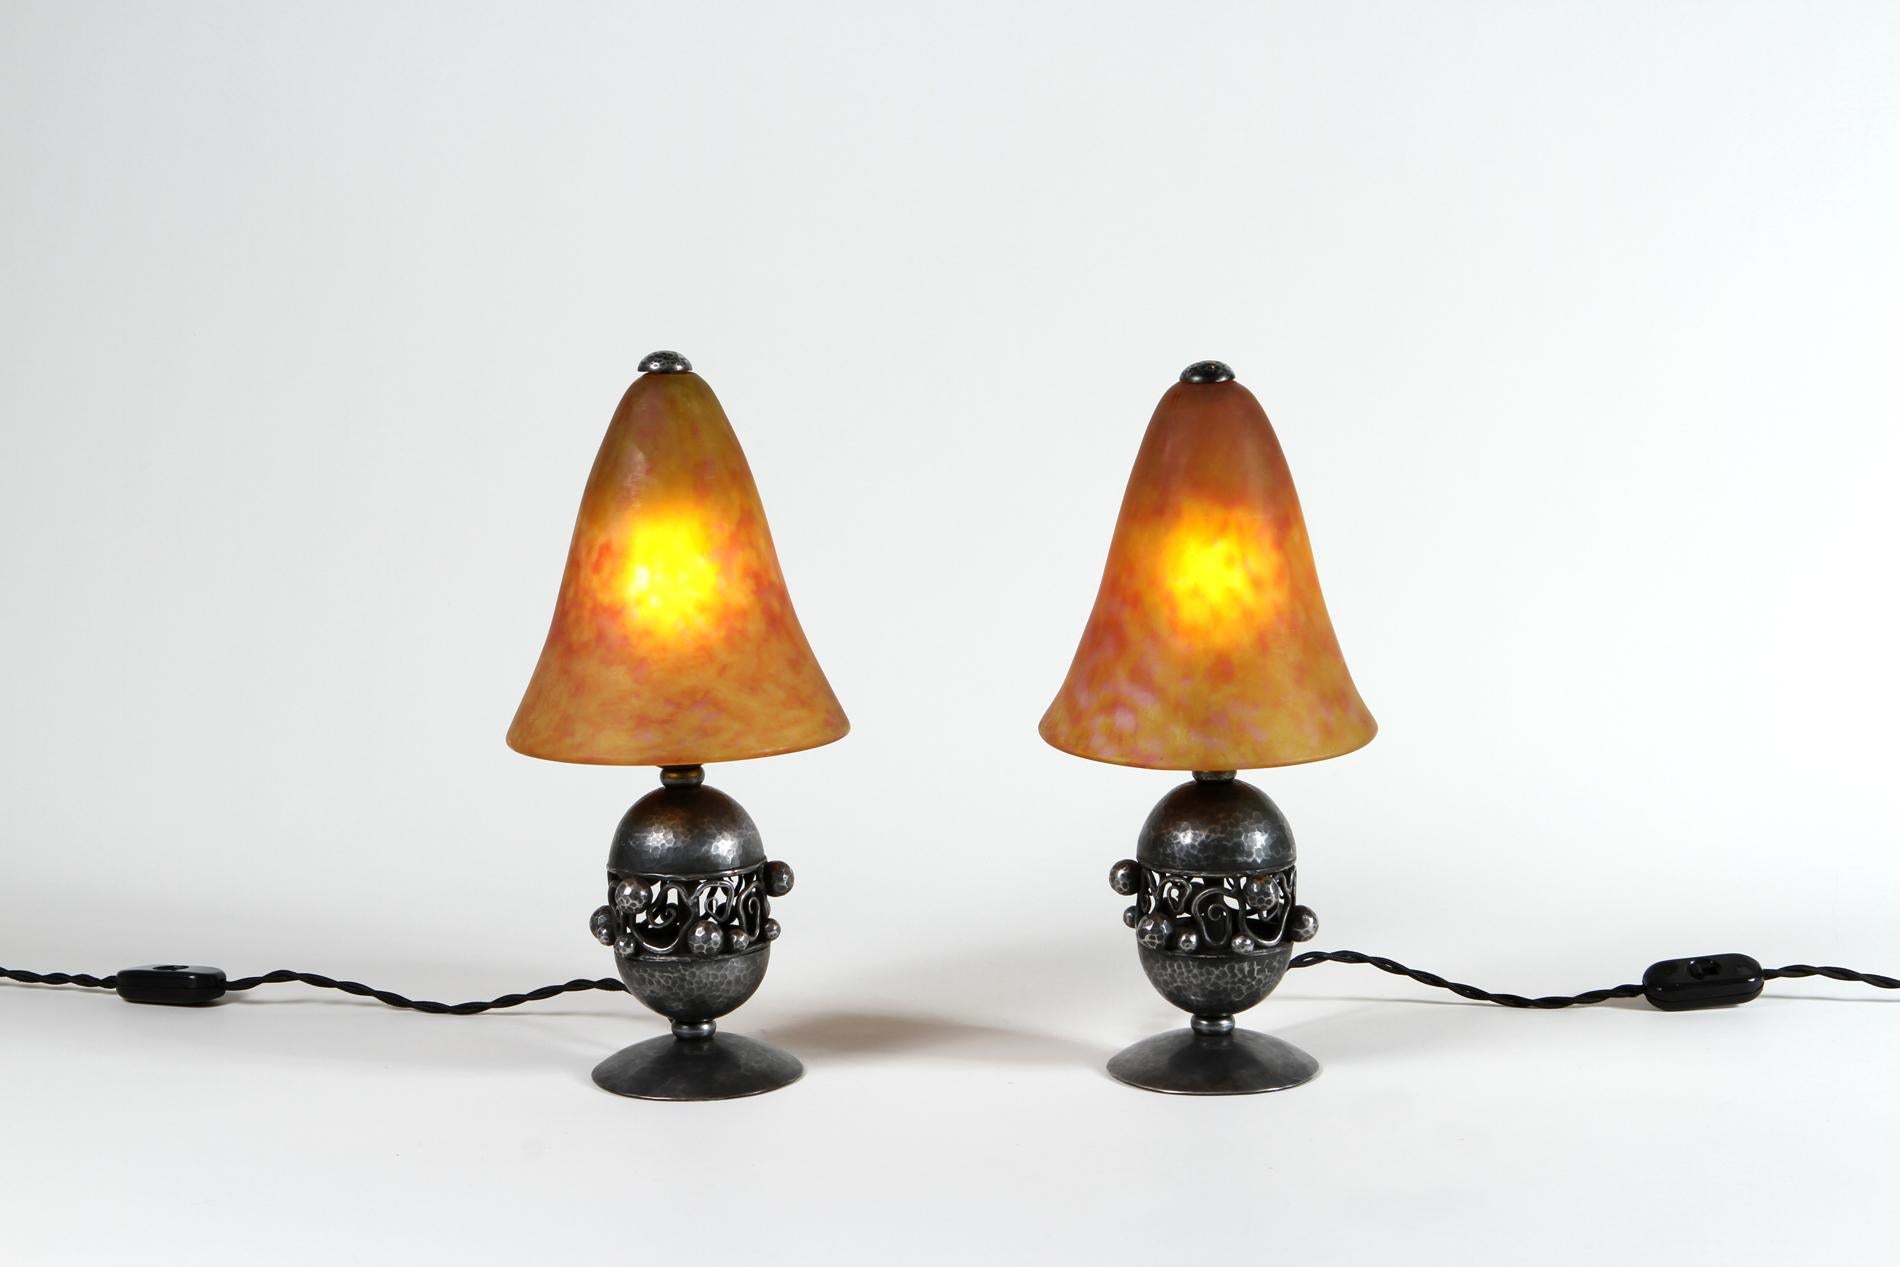 Original french Art deco small table lamps  in wrought iron and glass made by Edgar Brandt and Daum. Iconic model creation between the two artists signed on the base. 